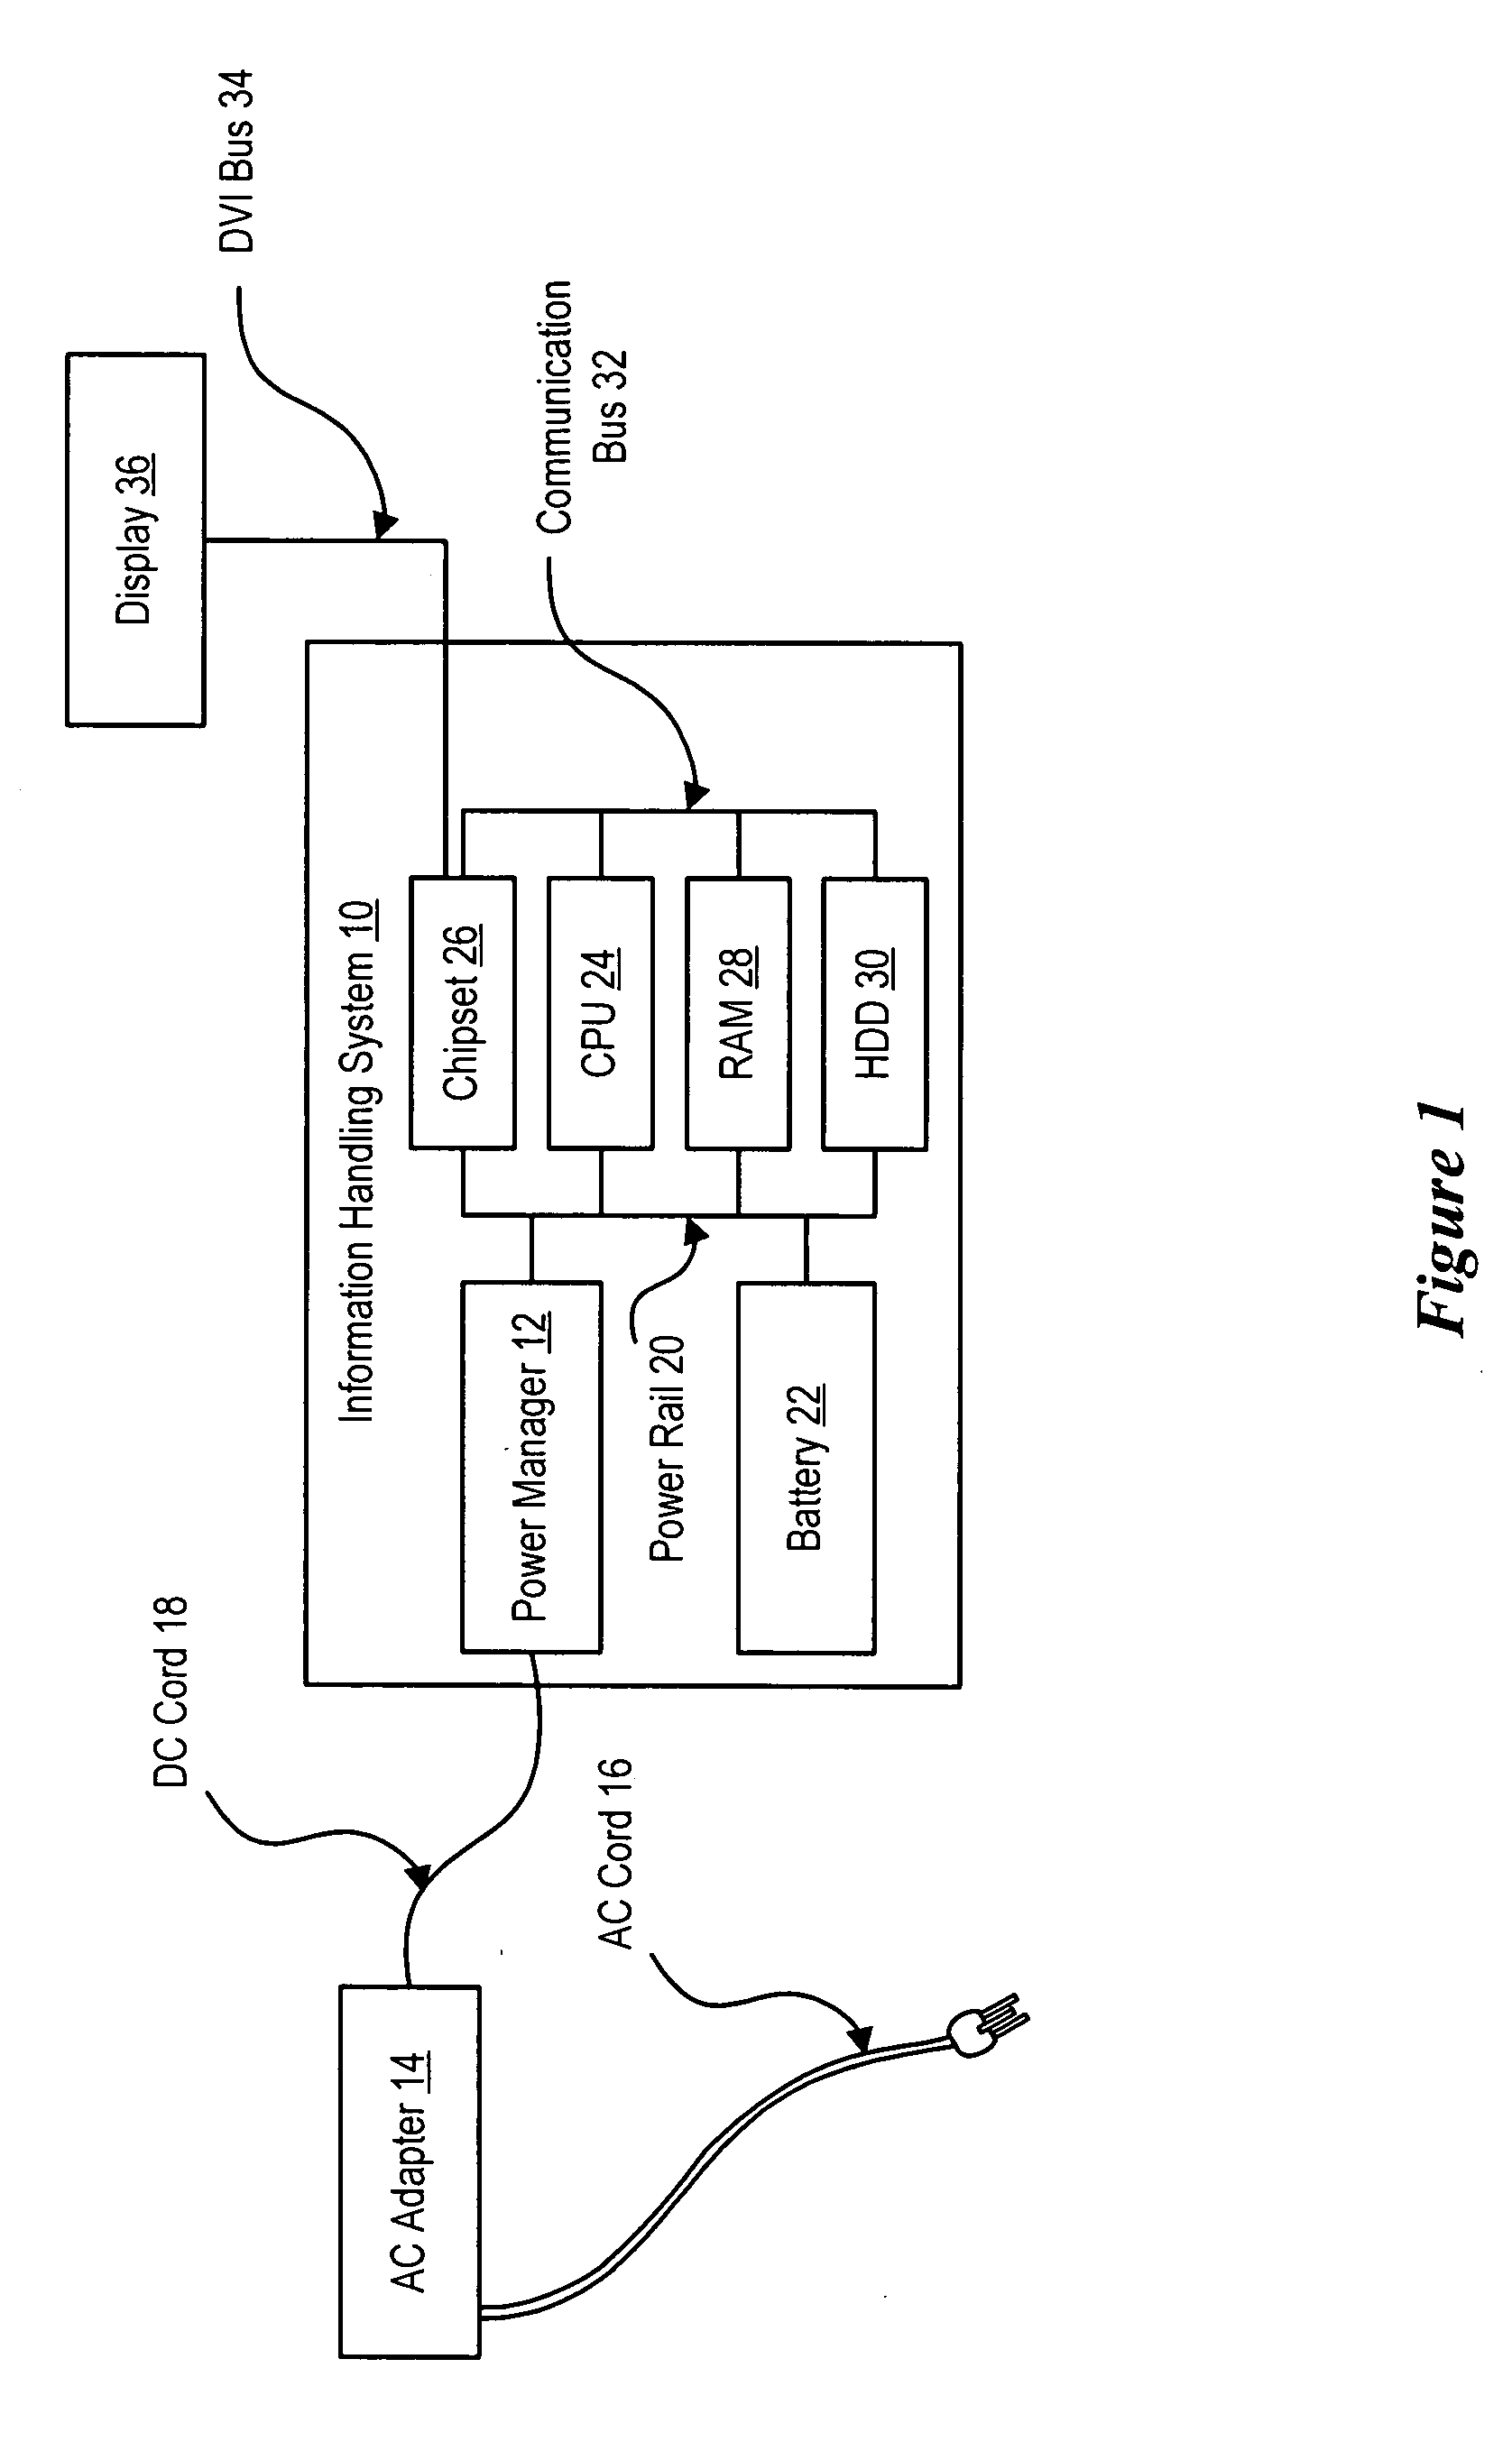 System and method for managing power provided to a portable information handling system